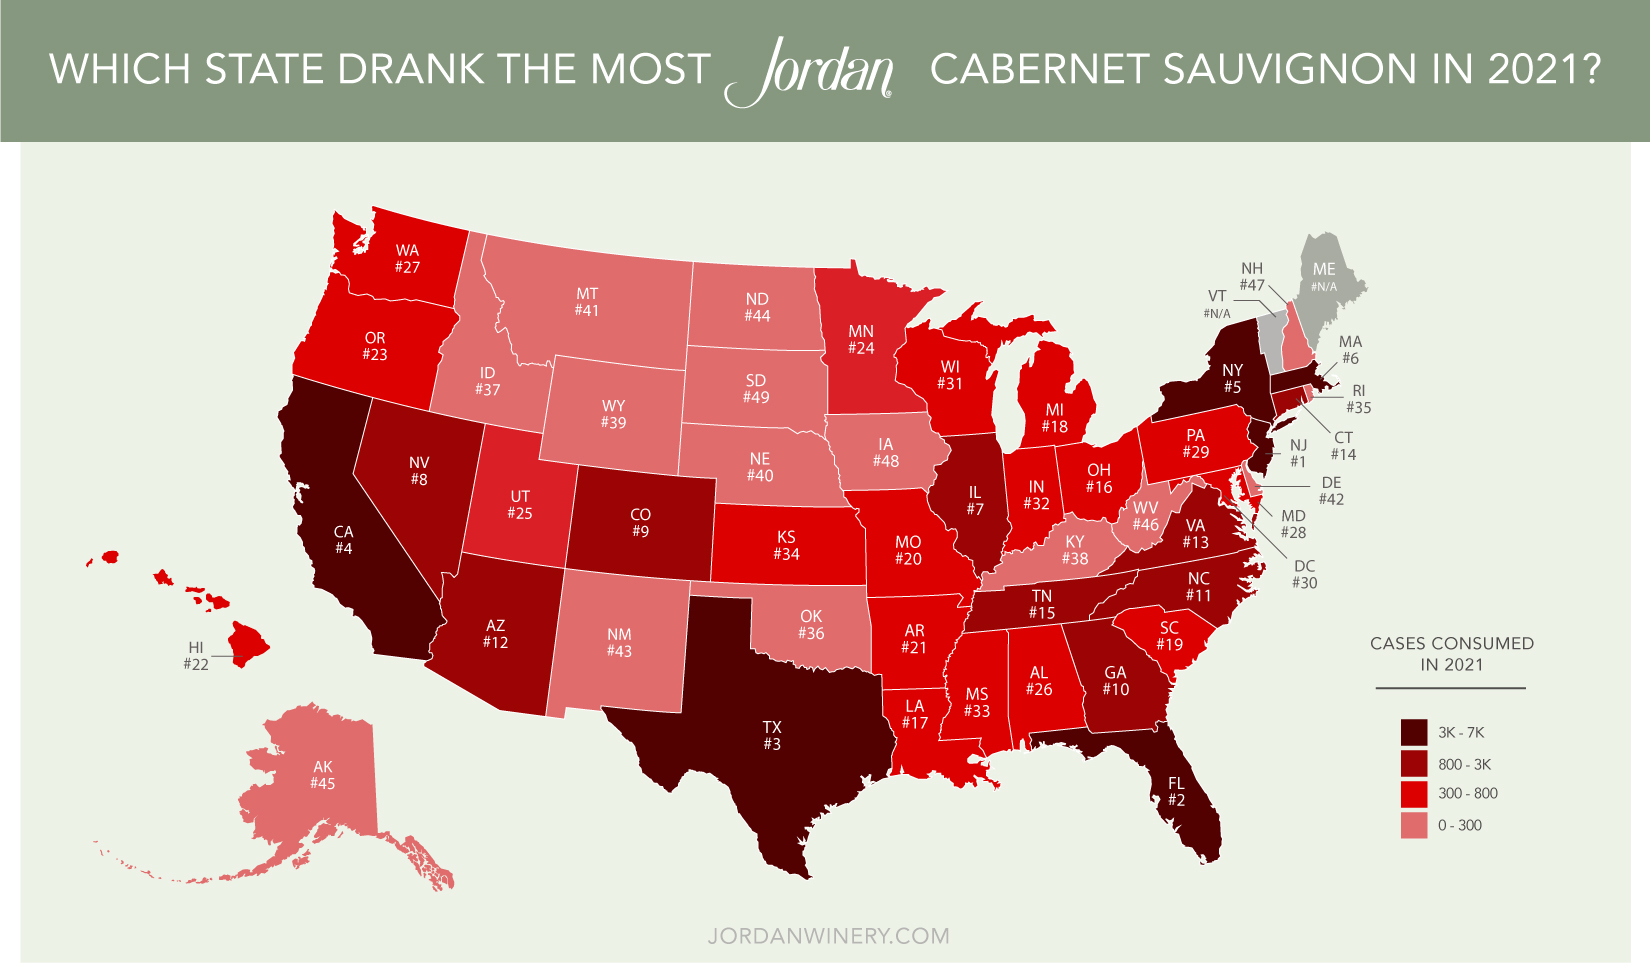 Map of United States showing Jordan Cabernet Sauvignon consumption by state